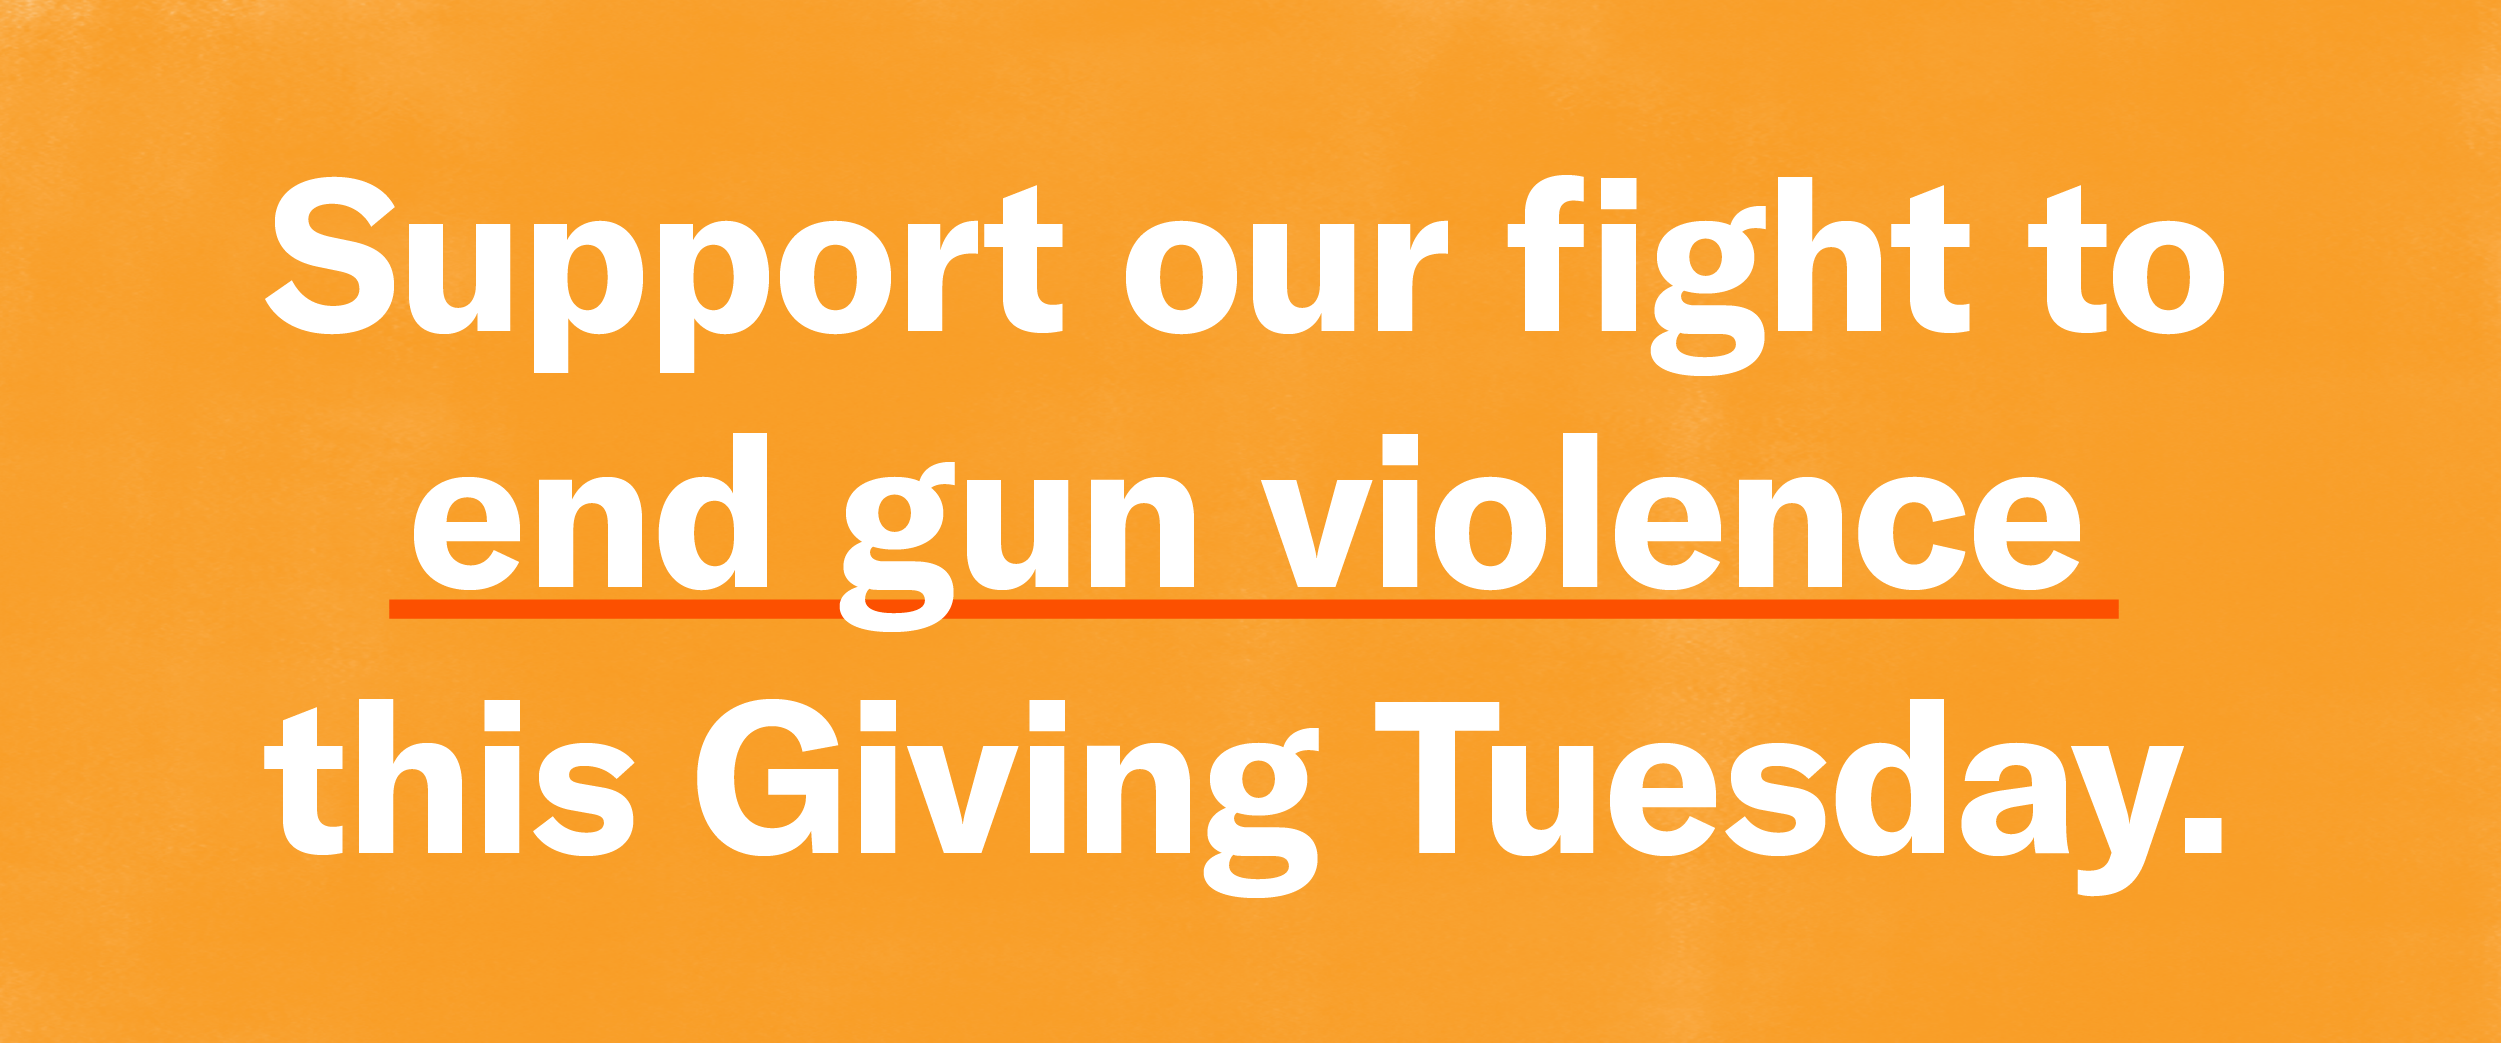 Support our fight to end gun violence this Giving Tuesday.